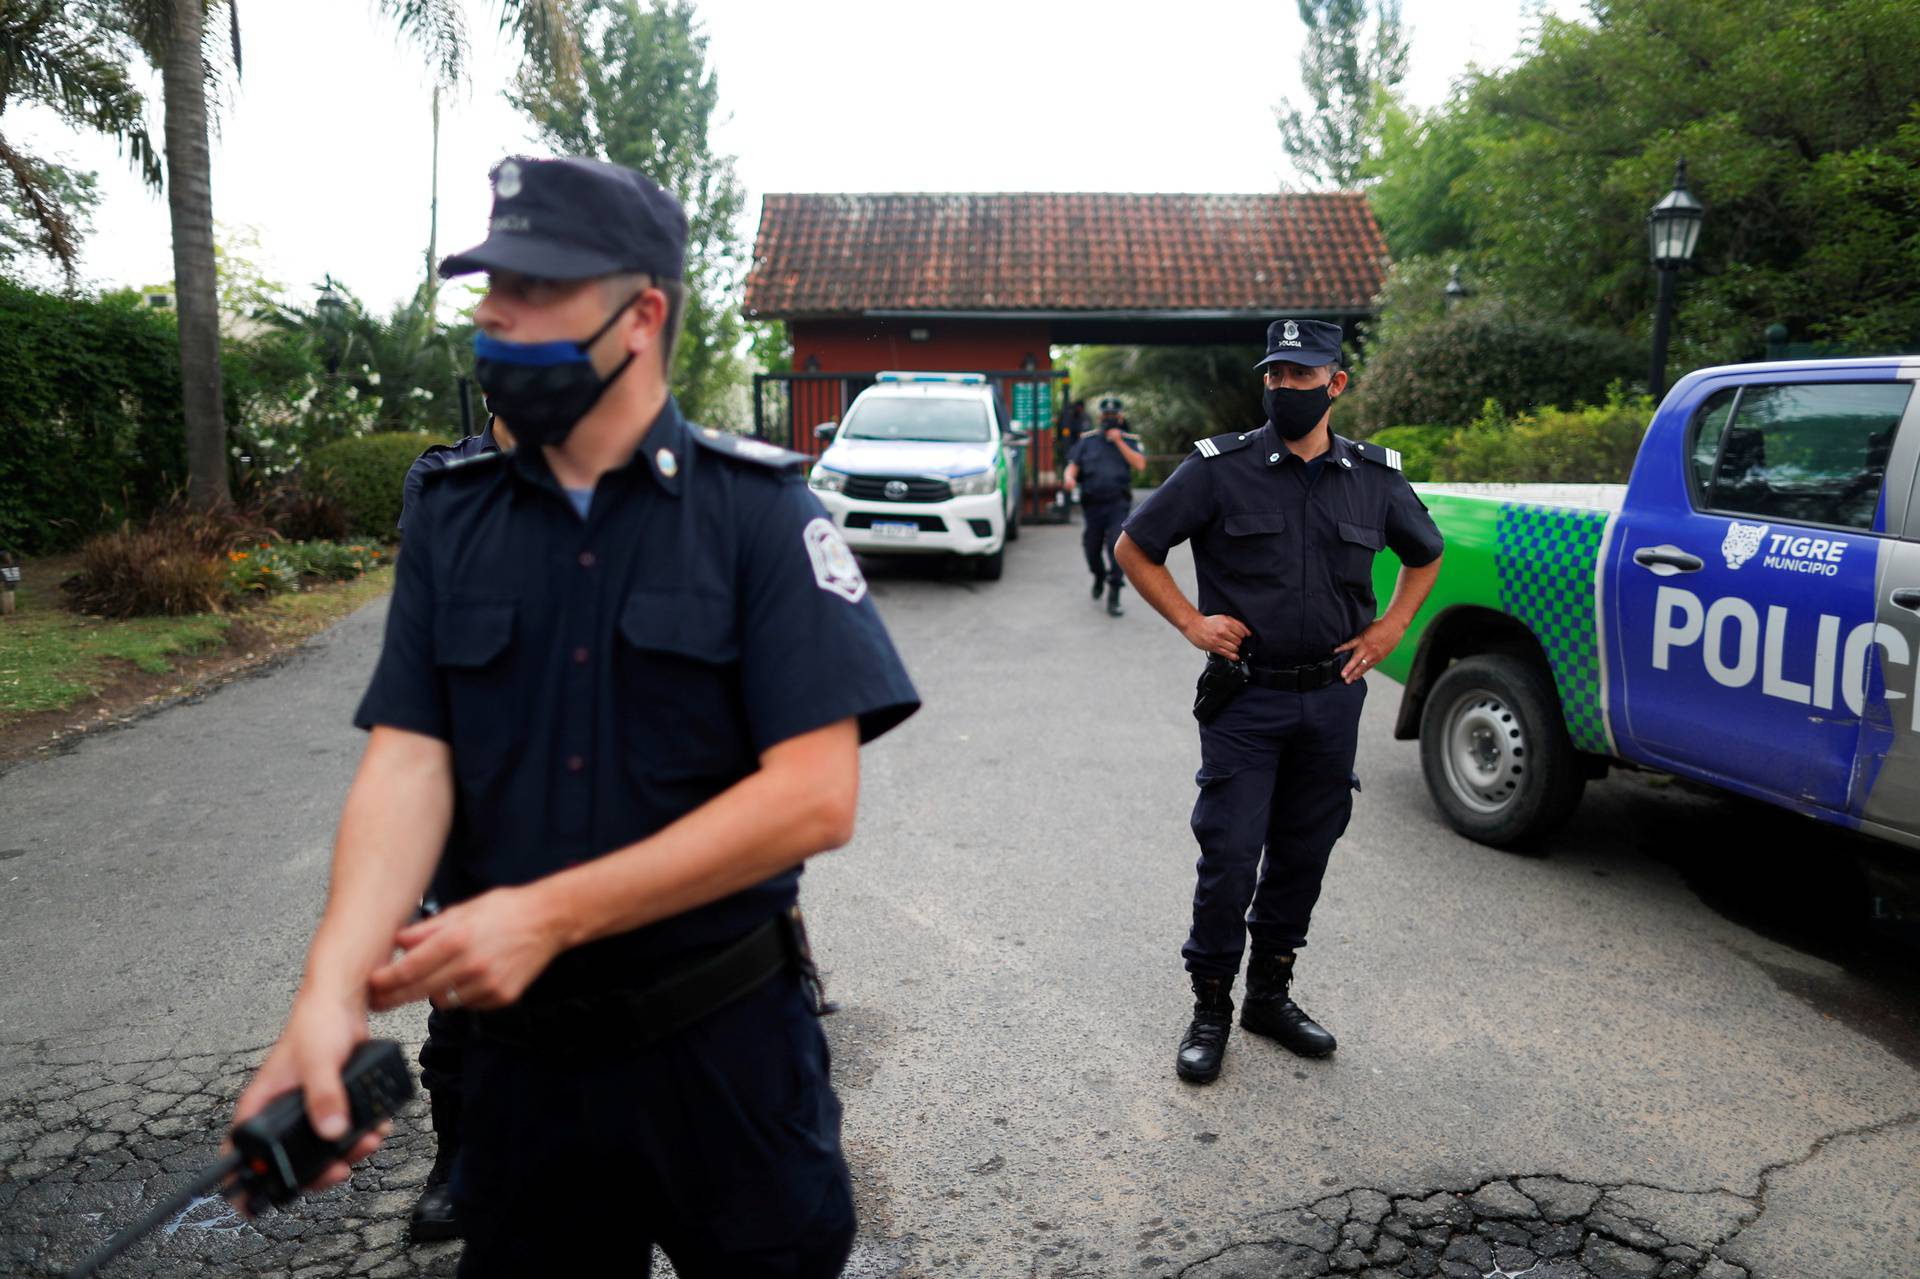 Police officers stand guard outside the house where Diego Maradona was recovering from surgery, in Tigre